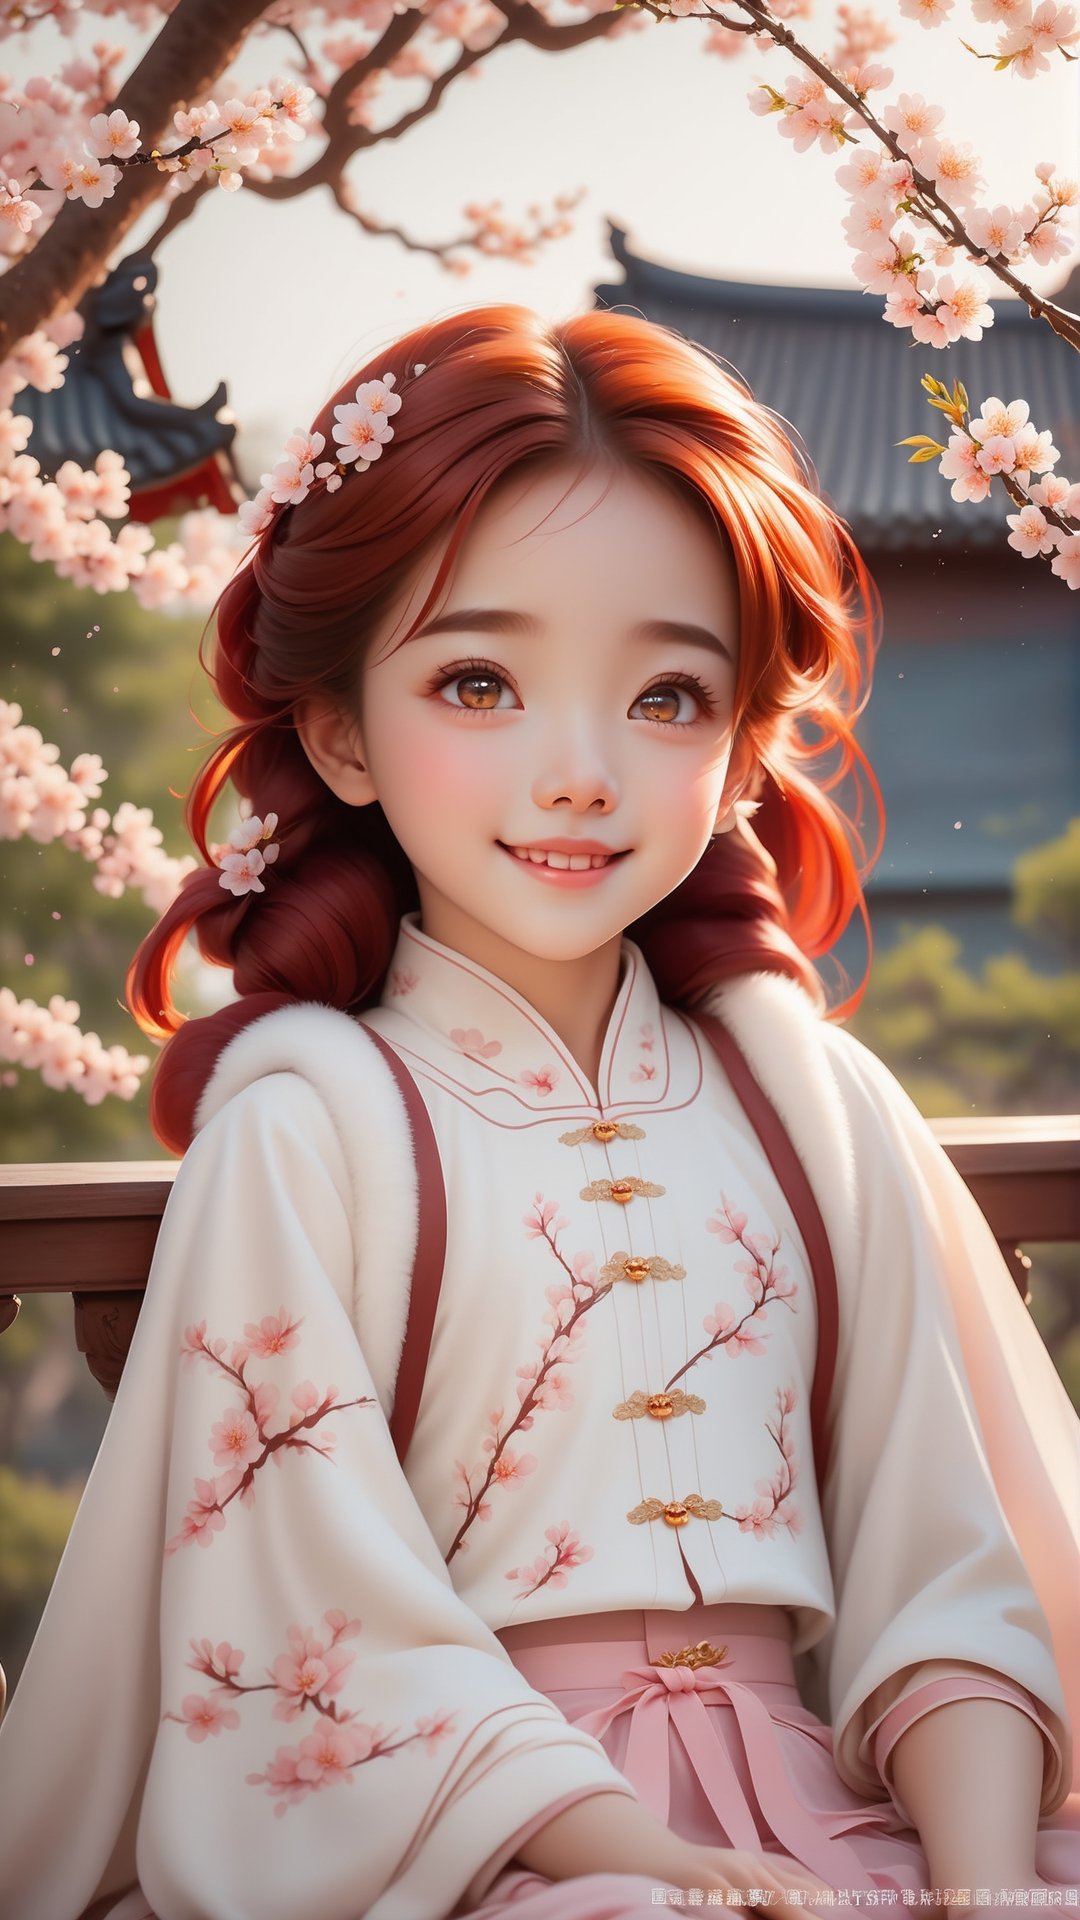 Pixar animated movie scene style, Chinese house style, in the morning light, plum blossom bloom, sunray through the leaves, a beautiful and cute little girl with beautiful eyes, red hair, sitting on the railing, perfect face, smiling happily, 32k ultra high definition, Pixar movie scene style, realistic high quality Portrait photography, eternal beauty, the lantern behind her emits a soft light, beautiful and dreamy, the flowers are in bloom, and the light bokeh serves as the background.